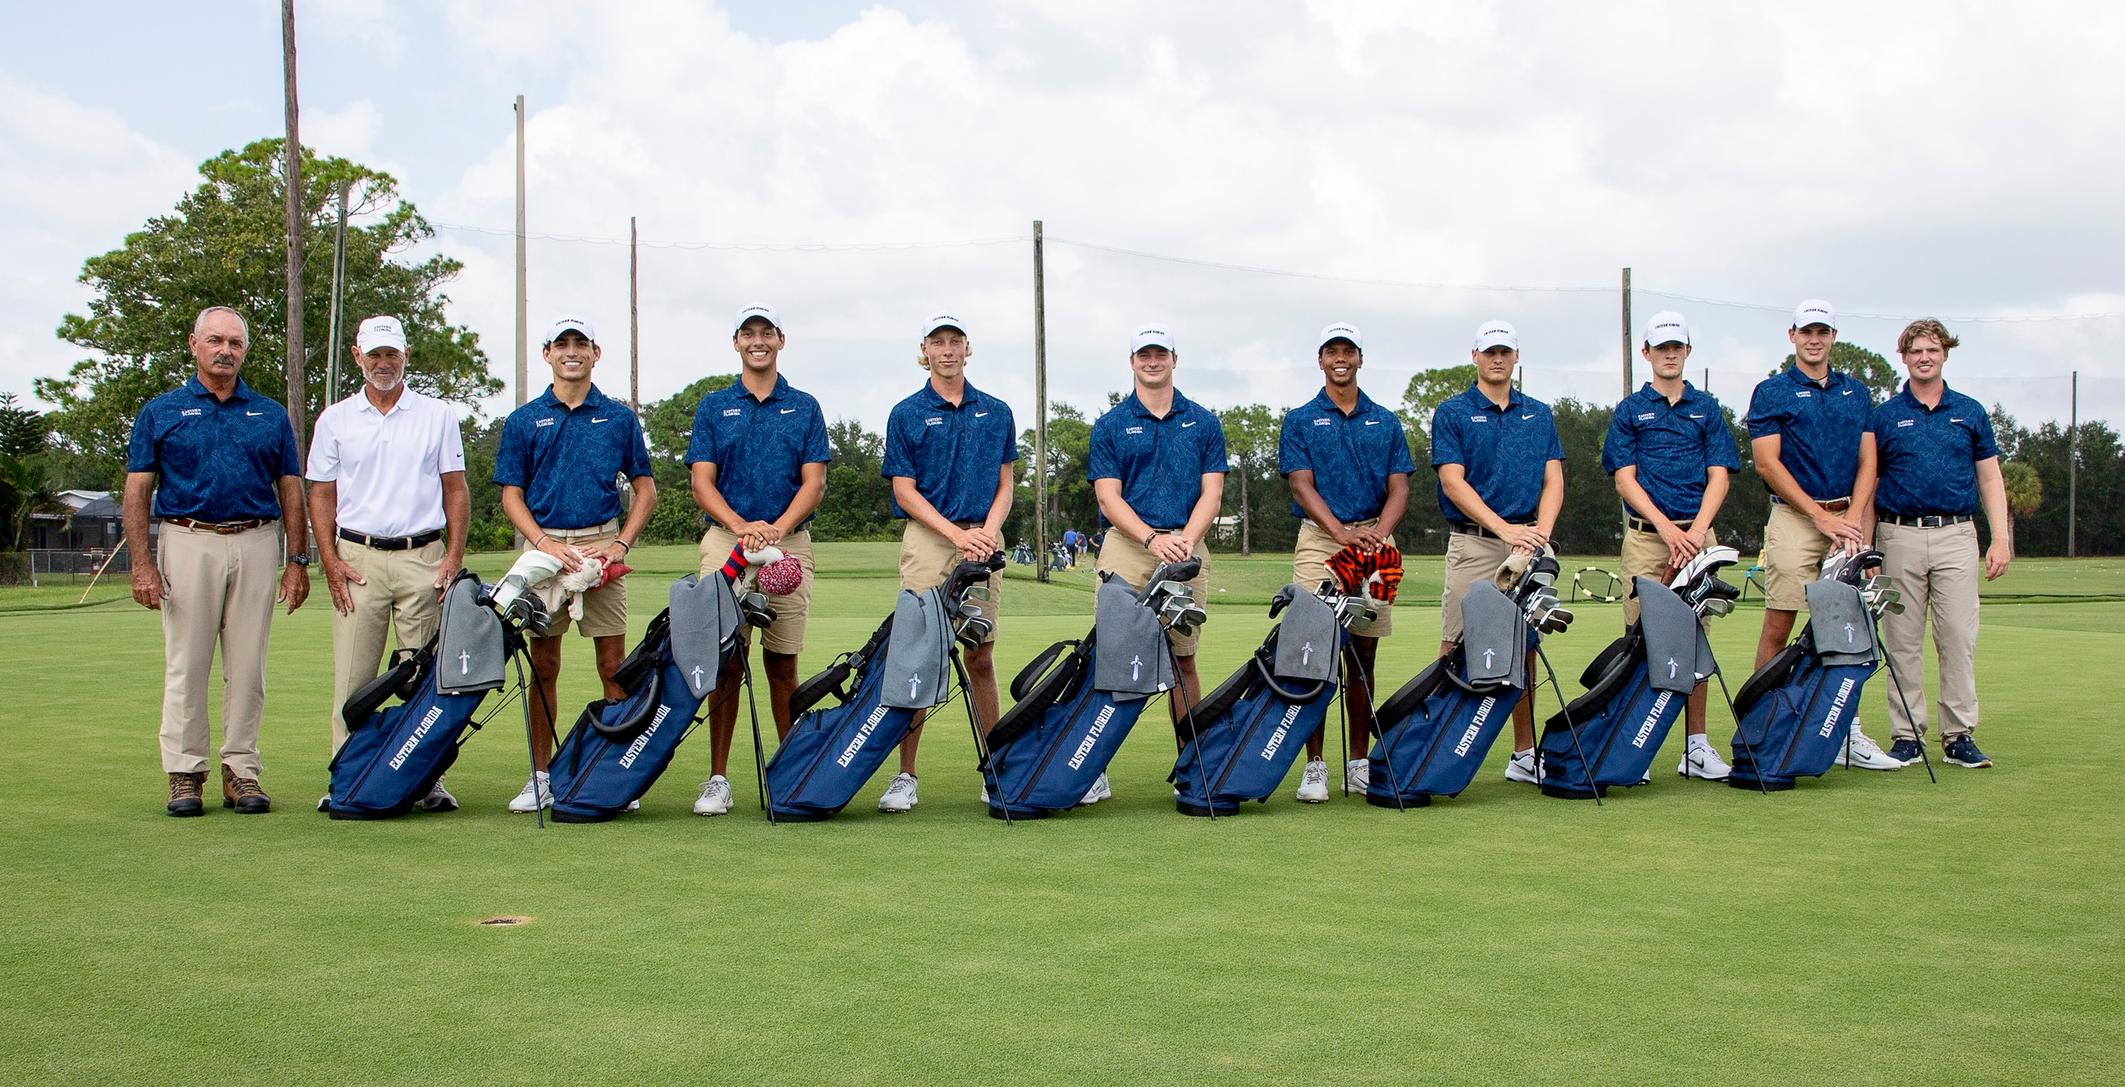 Men's golf team finishes in third place at Lioneer Invitational